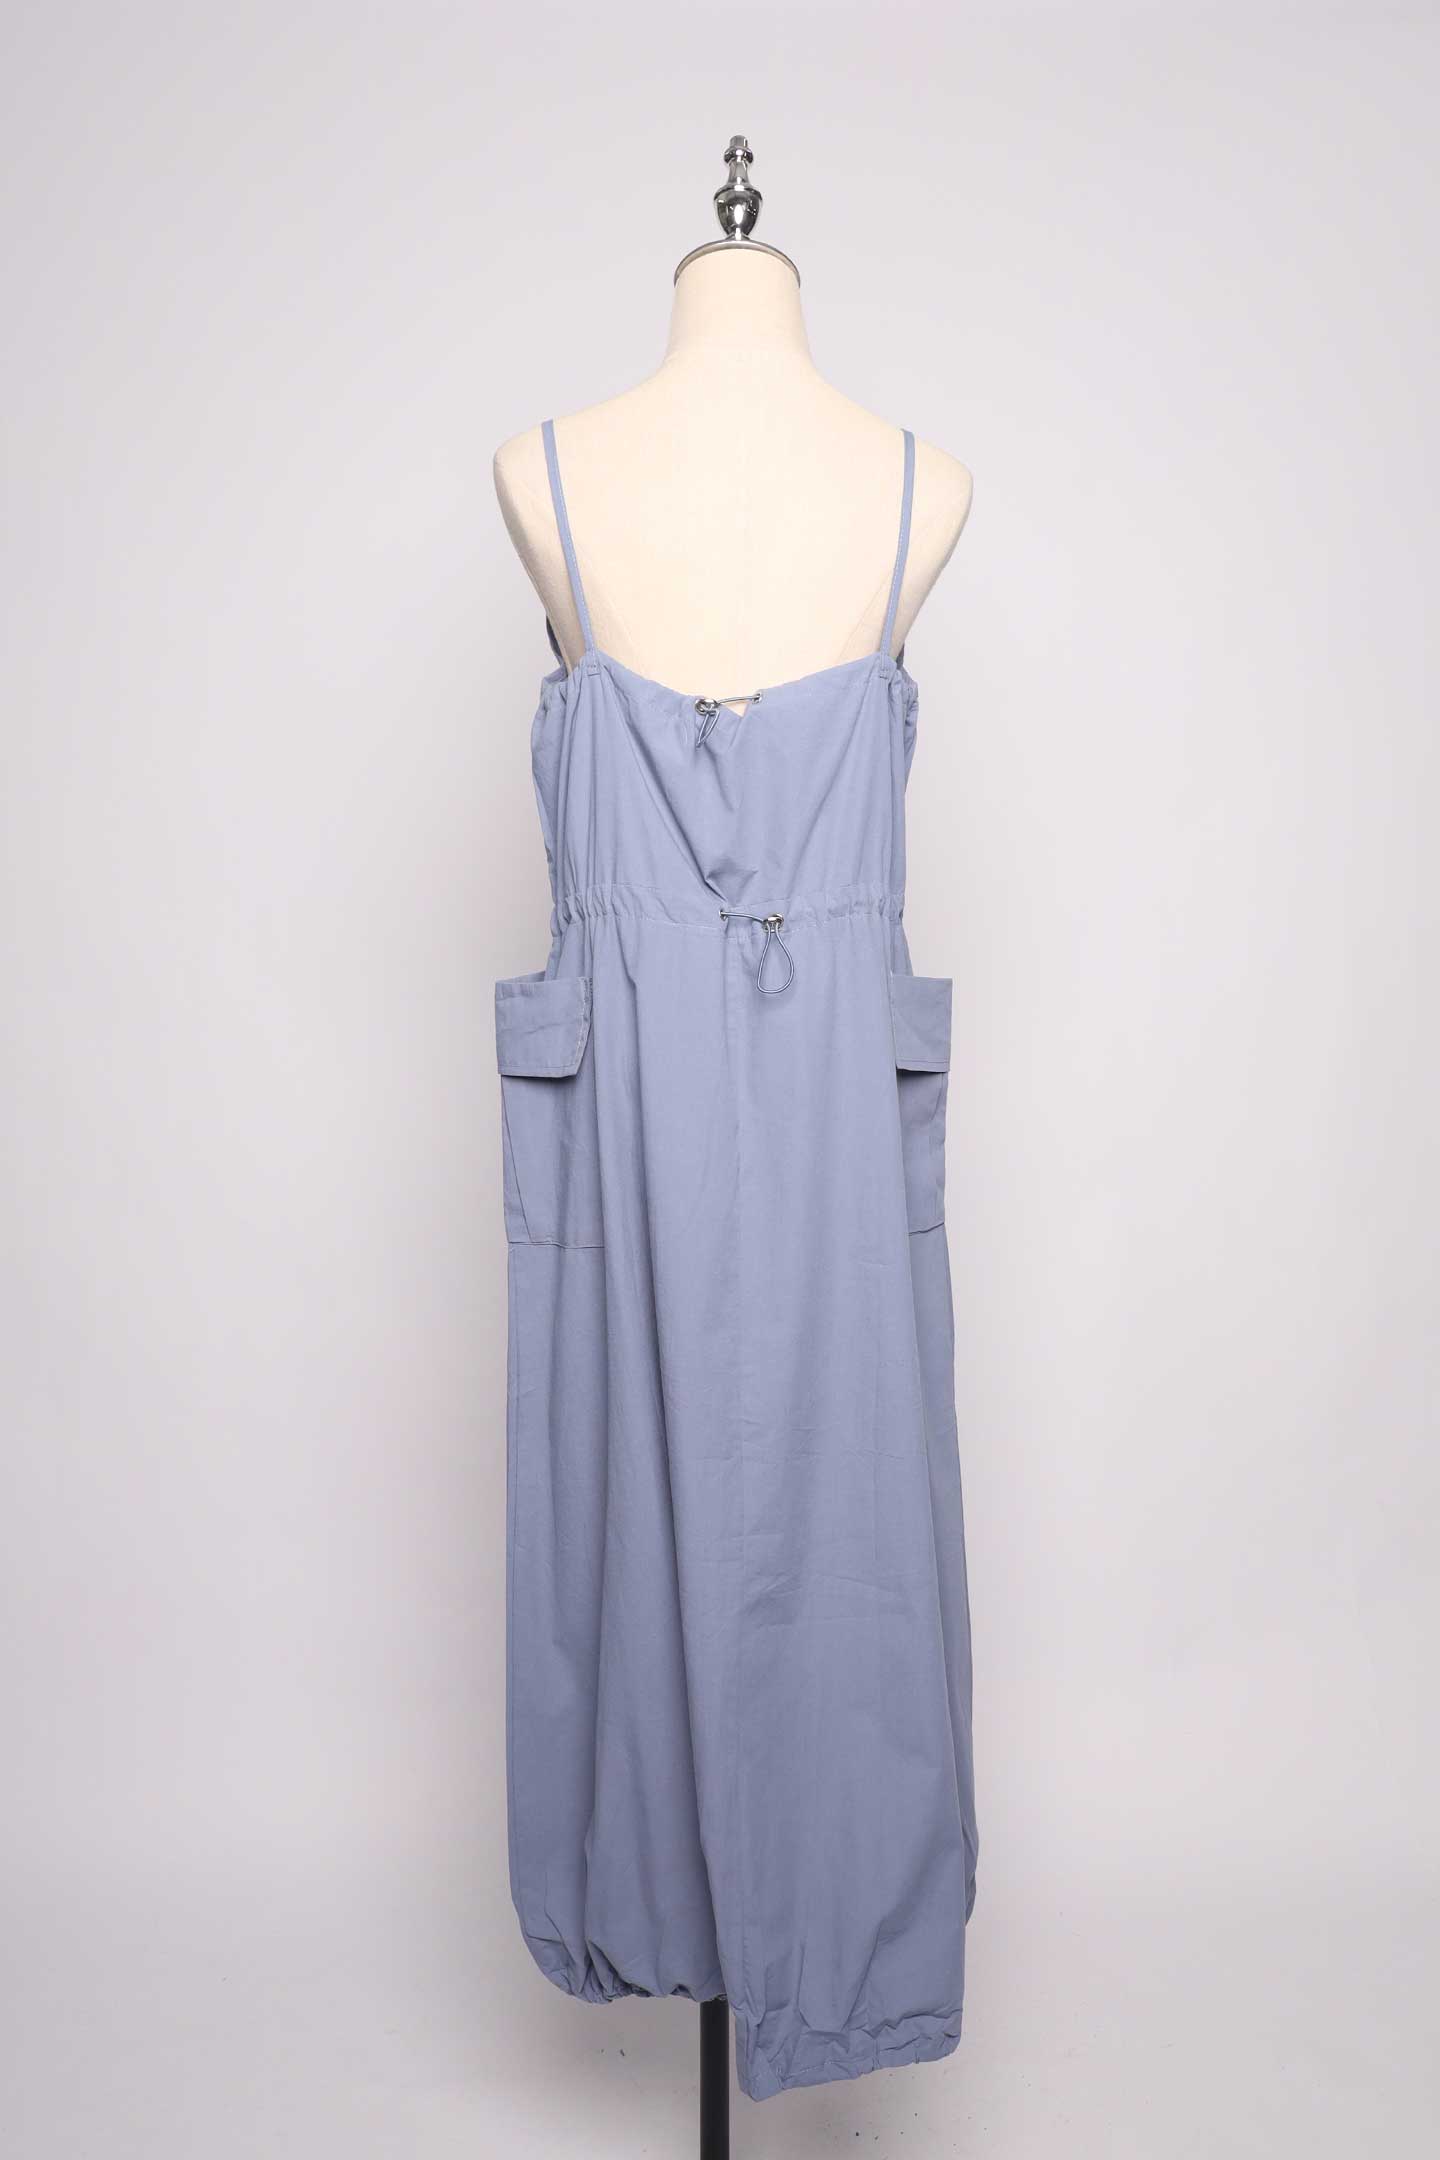 PO - Bailey Pinafore Dress in Blue